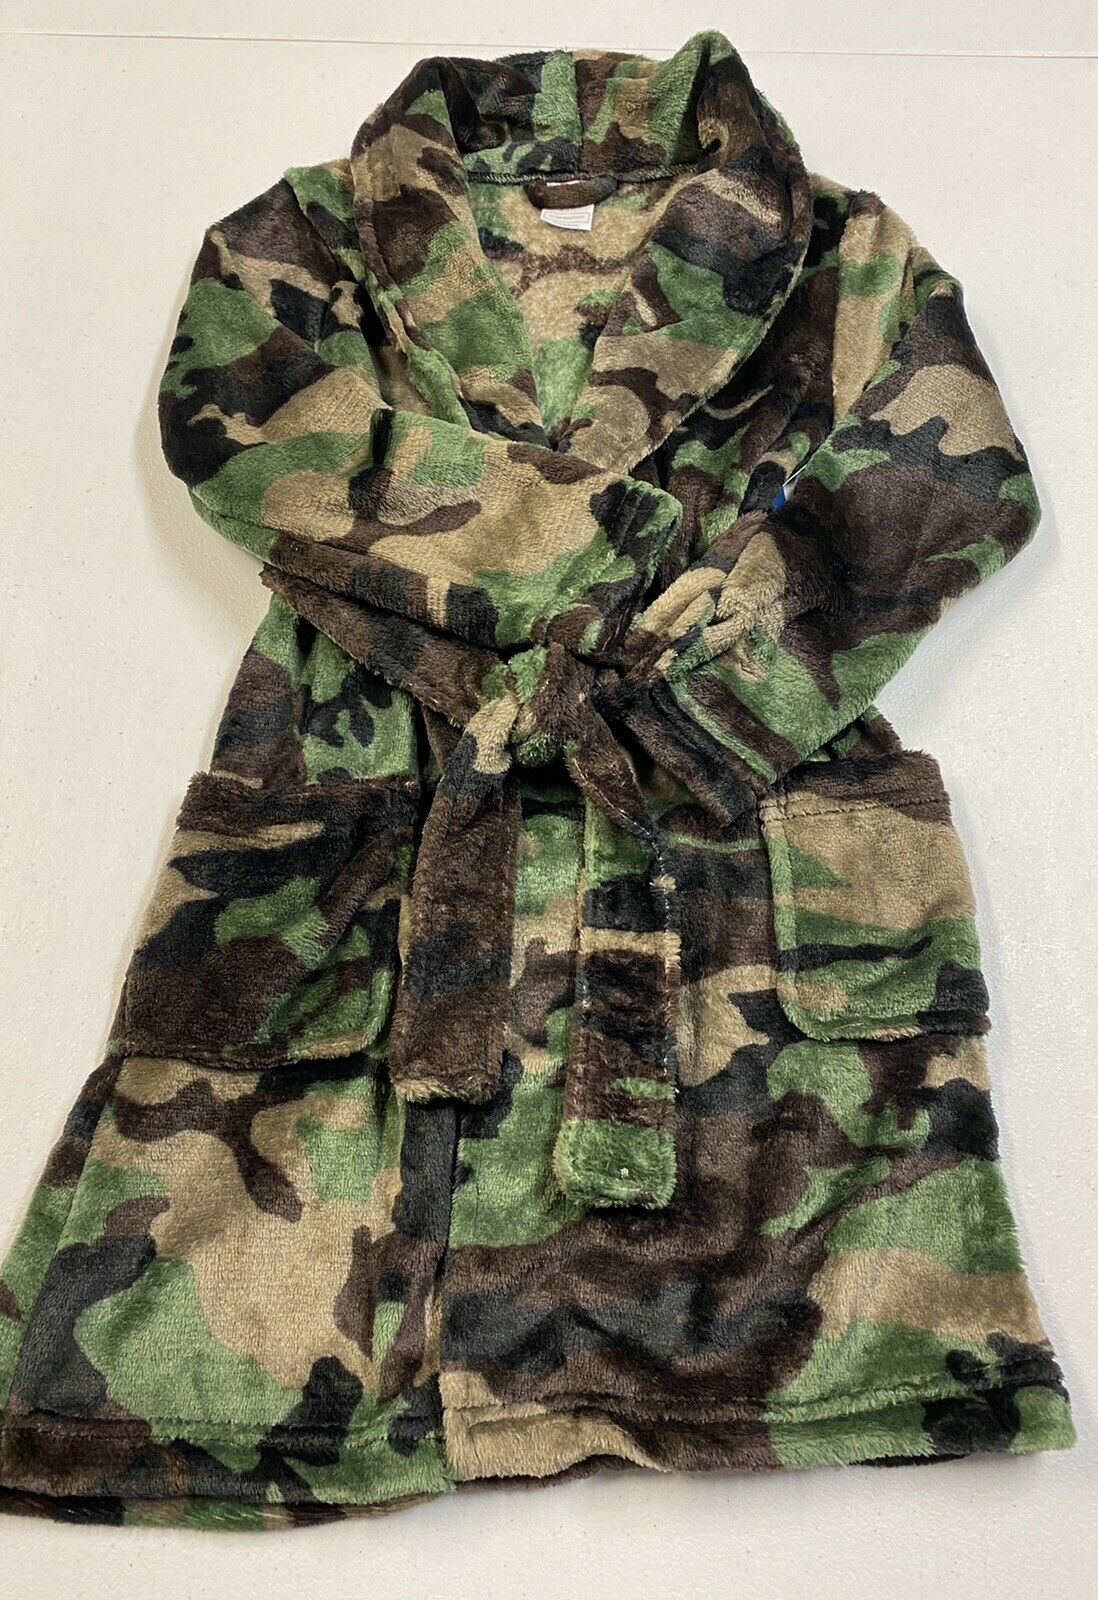 Wn Boys Super Soft Camouflage Robe  Size S 6/7 Nwt